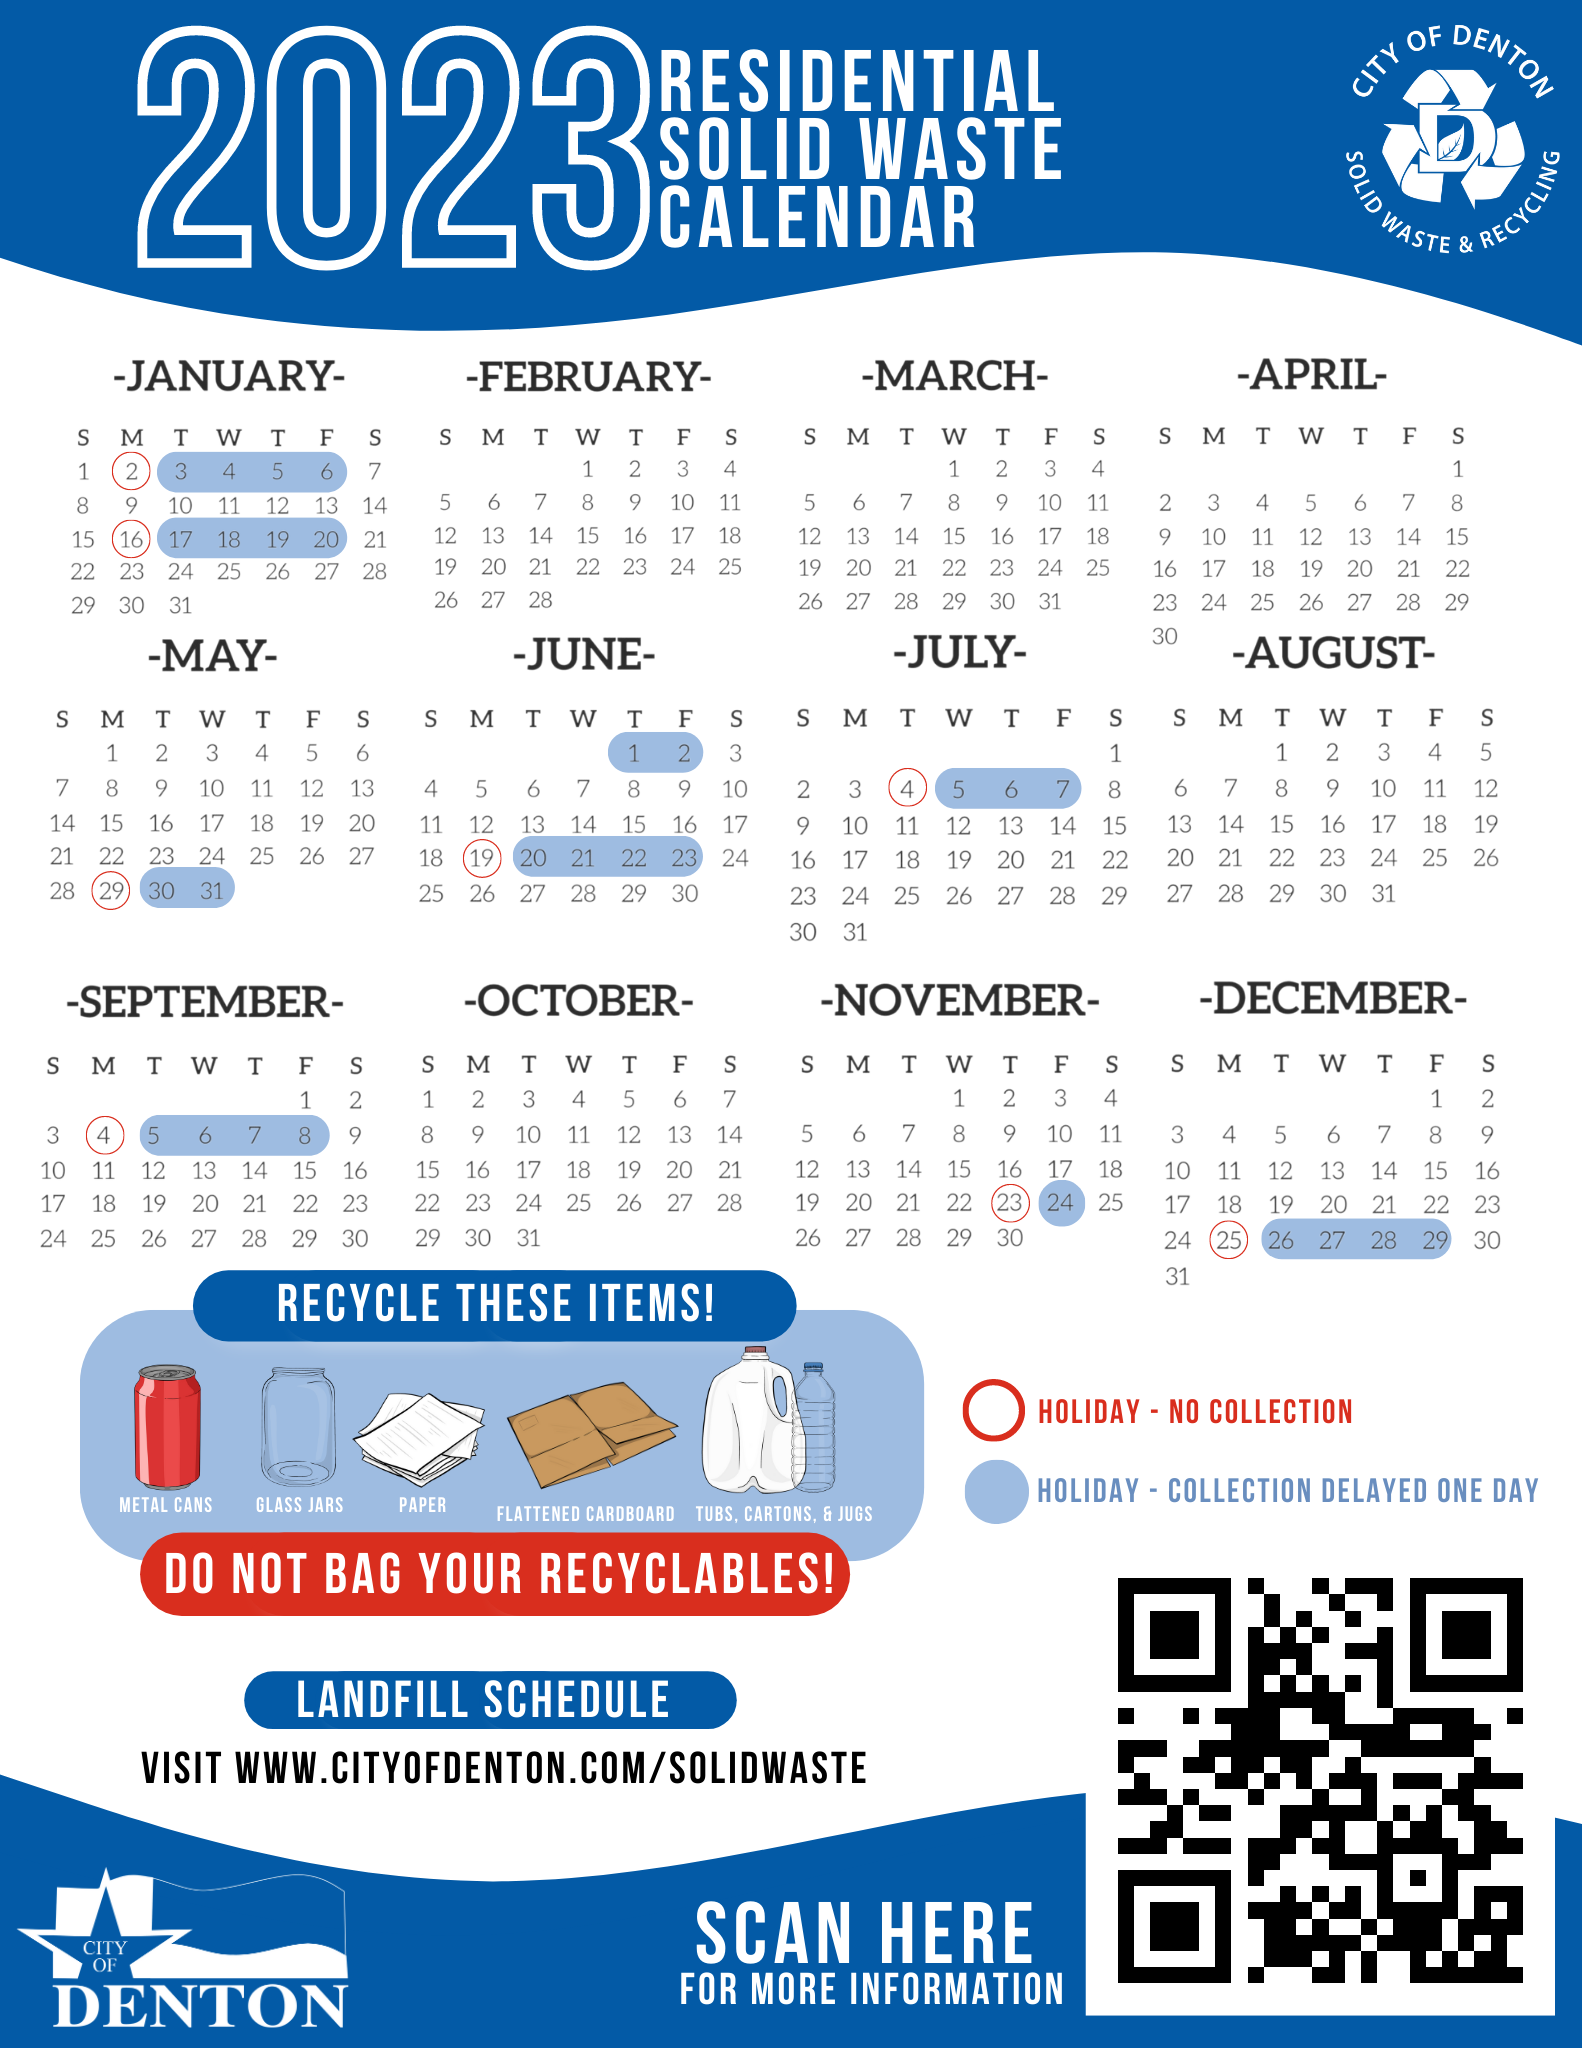 2023 Holiday Calendar. (City of Denton Solid Waste & Recycling